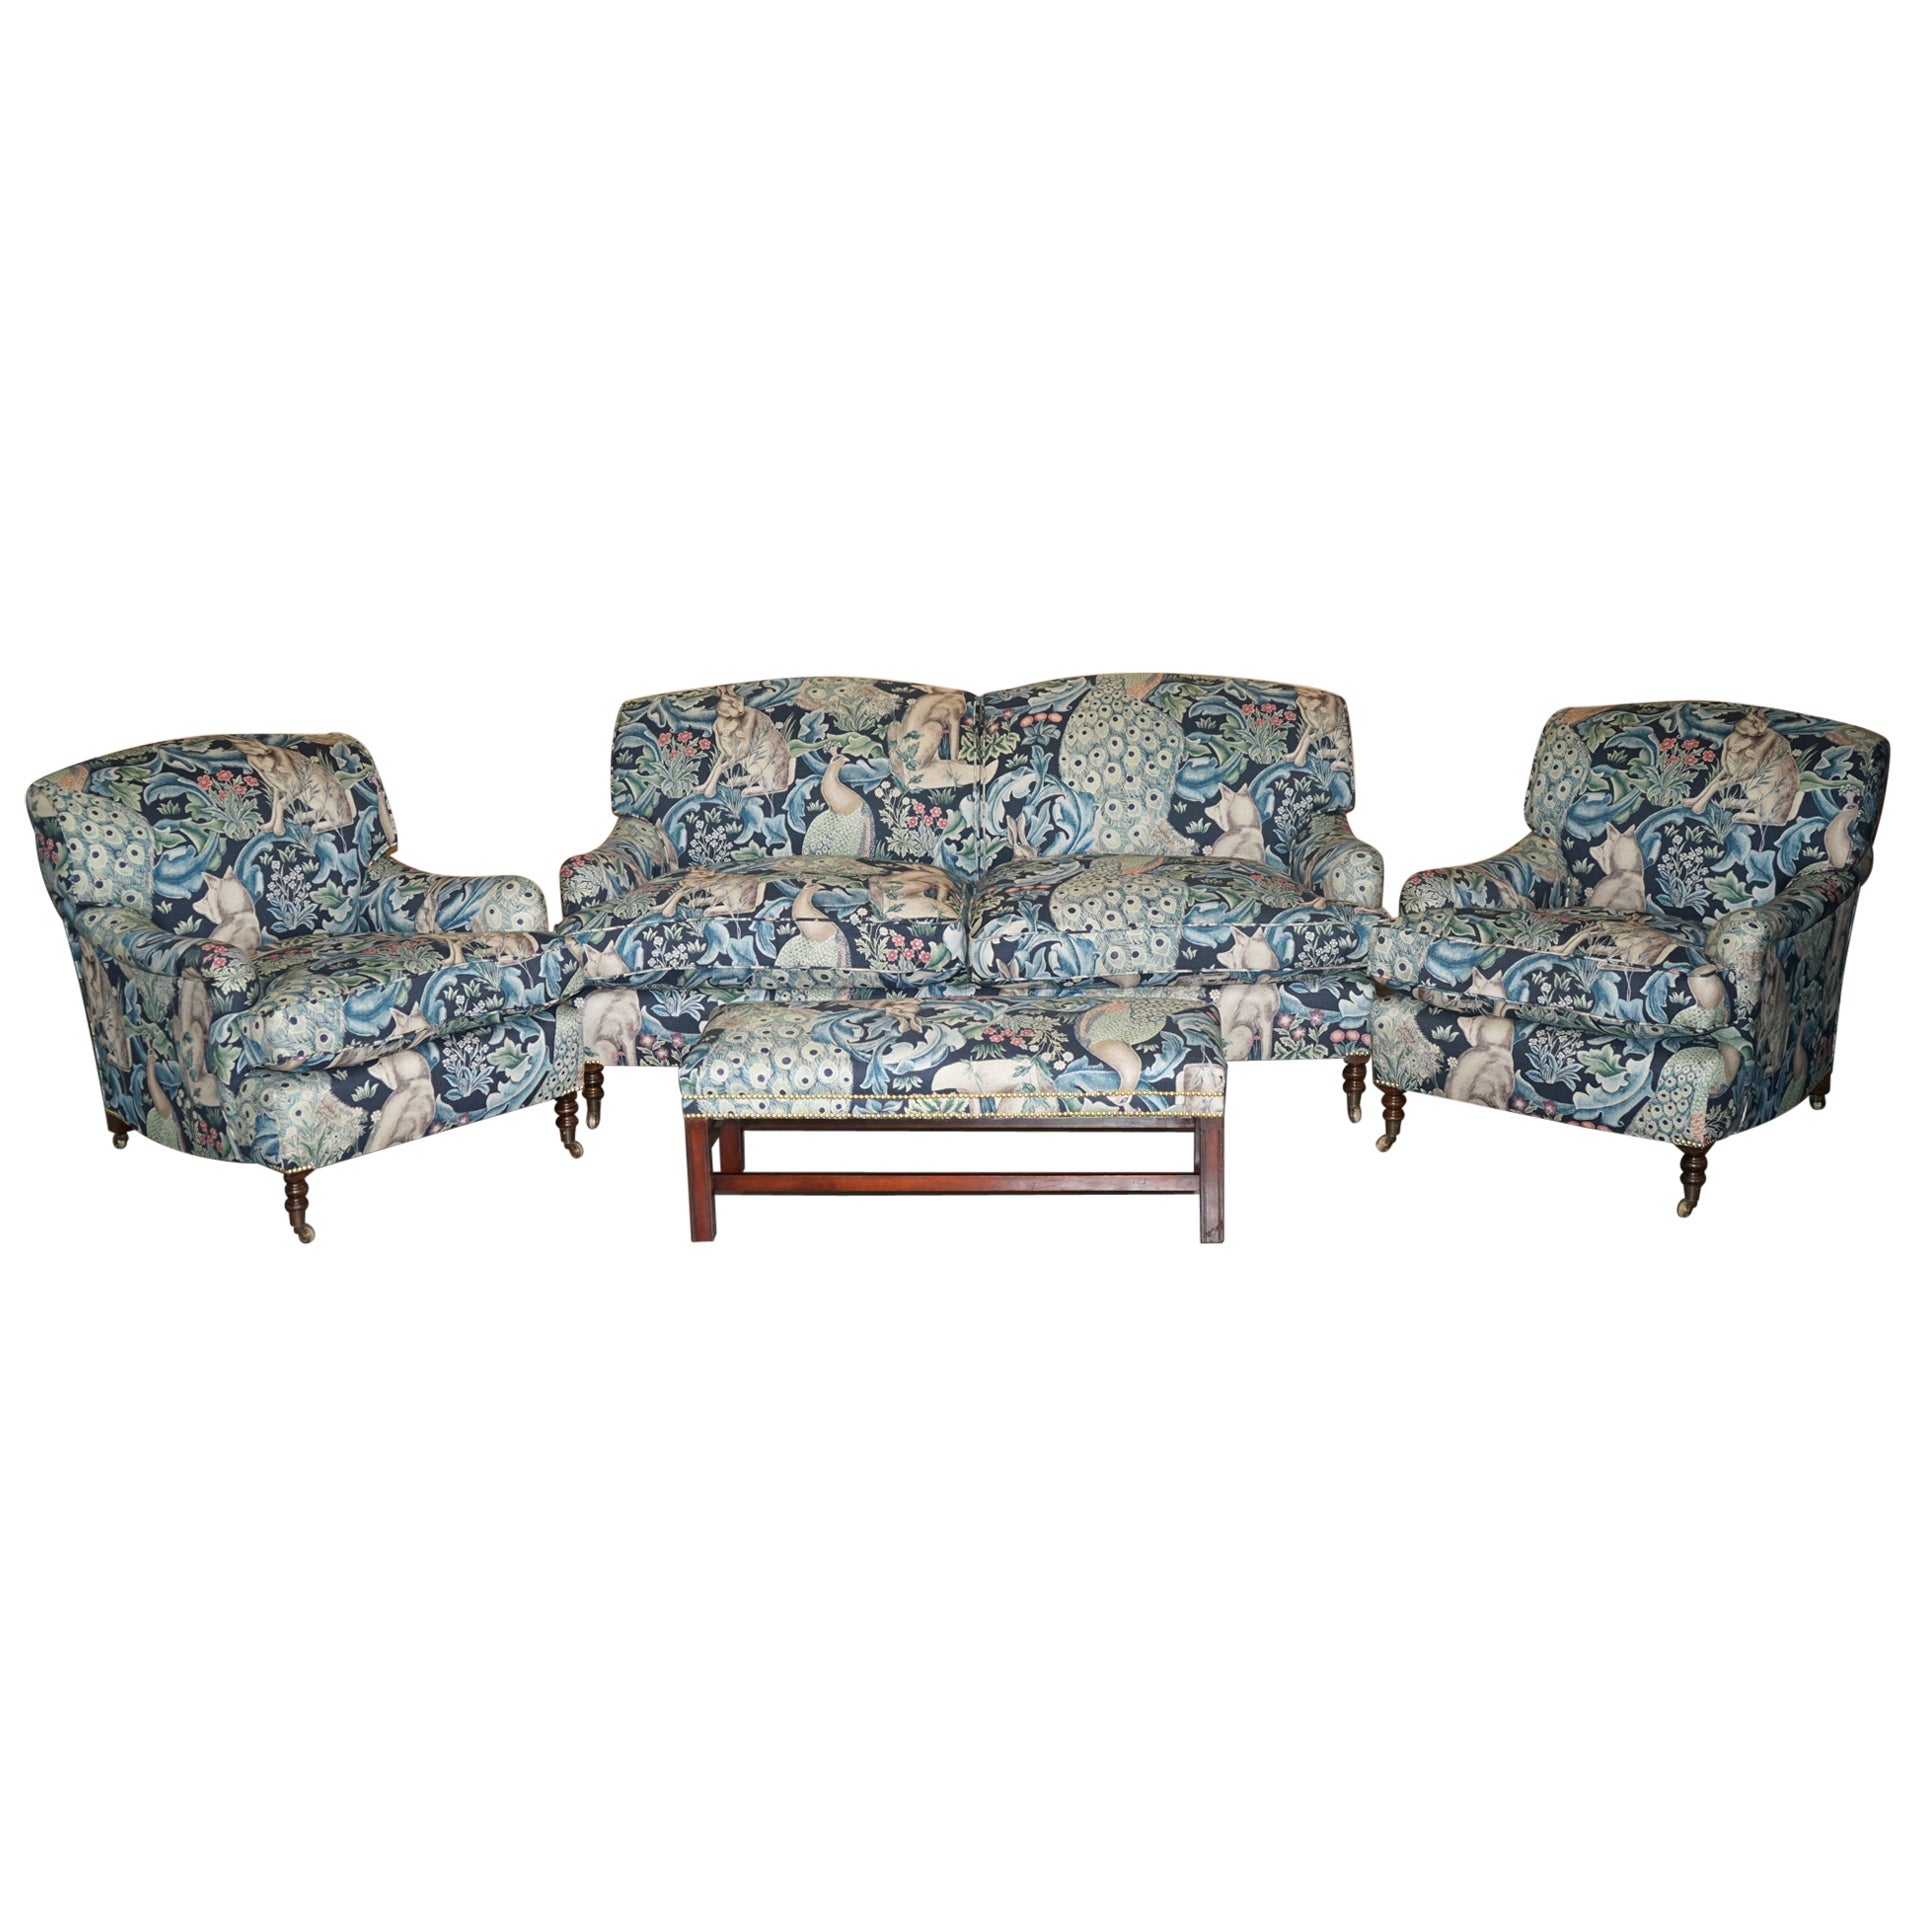 George Smith Living Room Sets